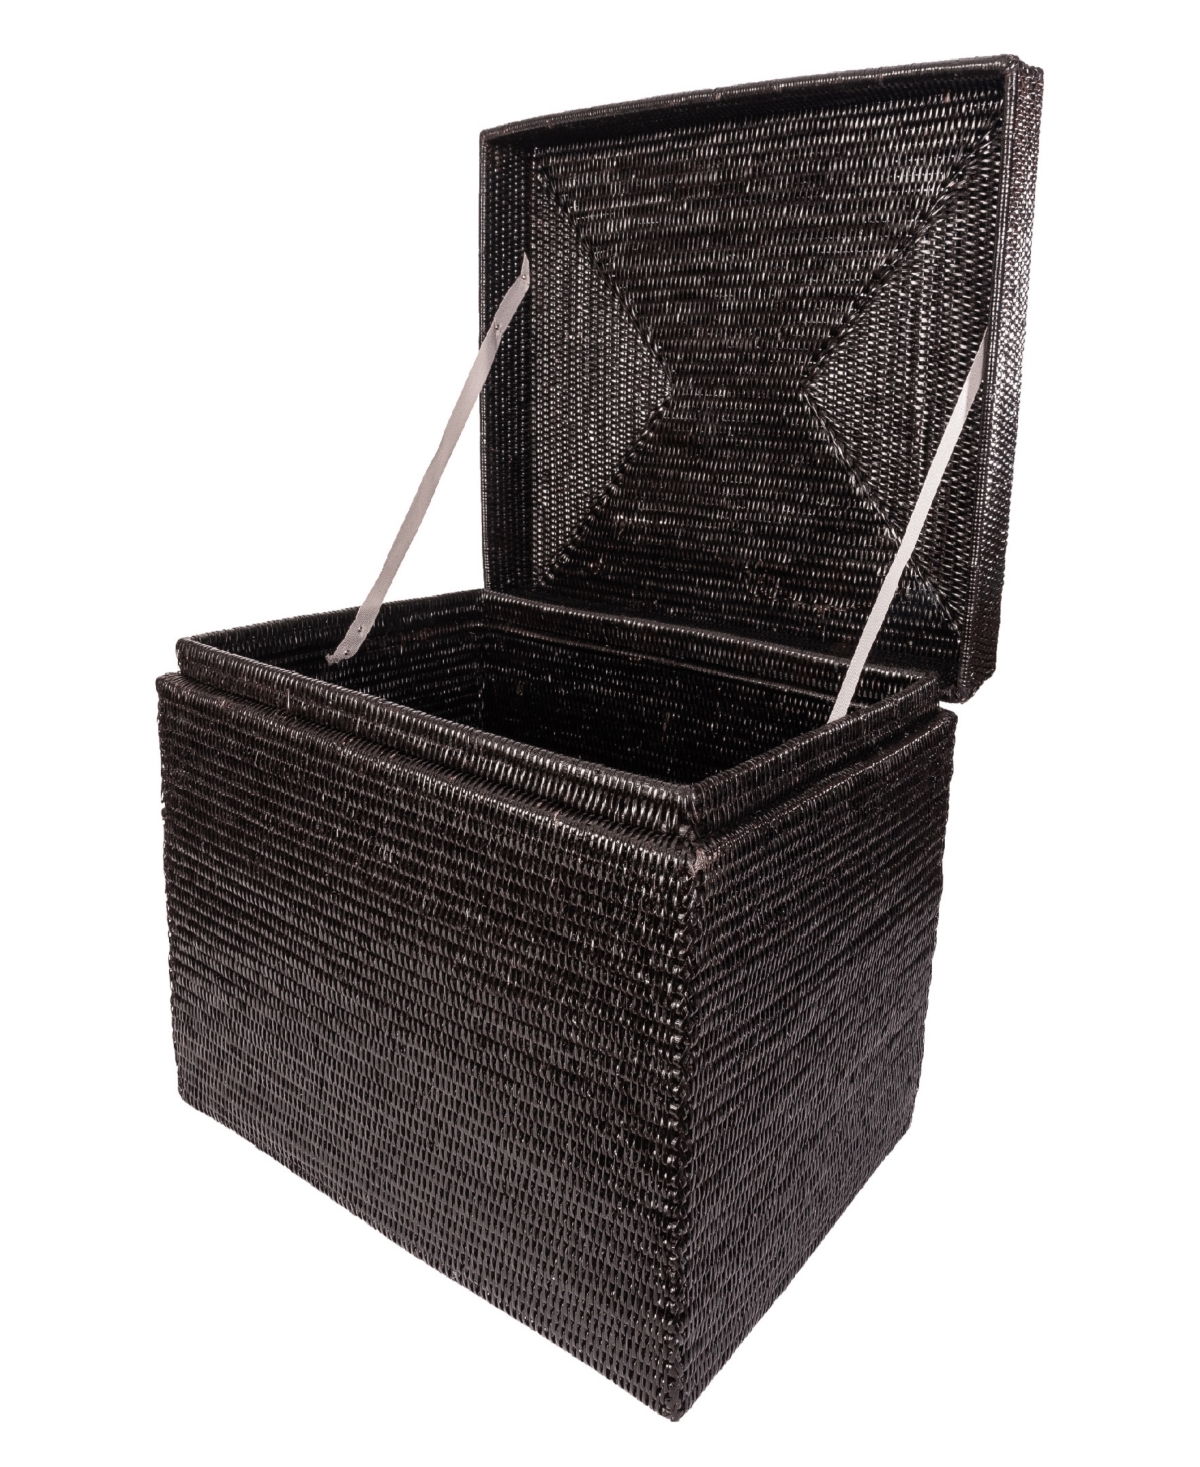 Artifacts Trading Company Artifacts Rattan Rectangular Hinged Chest/trunk In Tudor Black